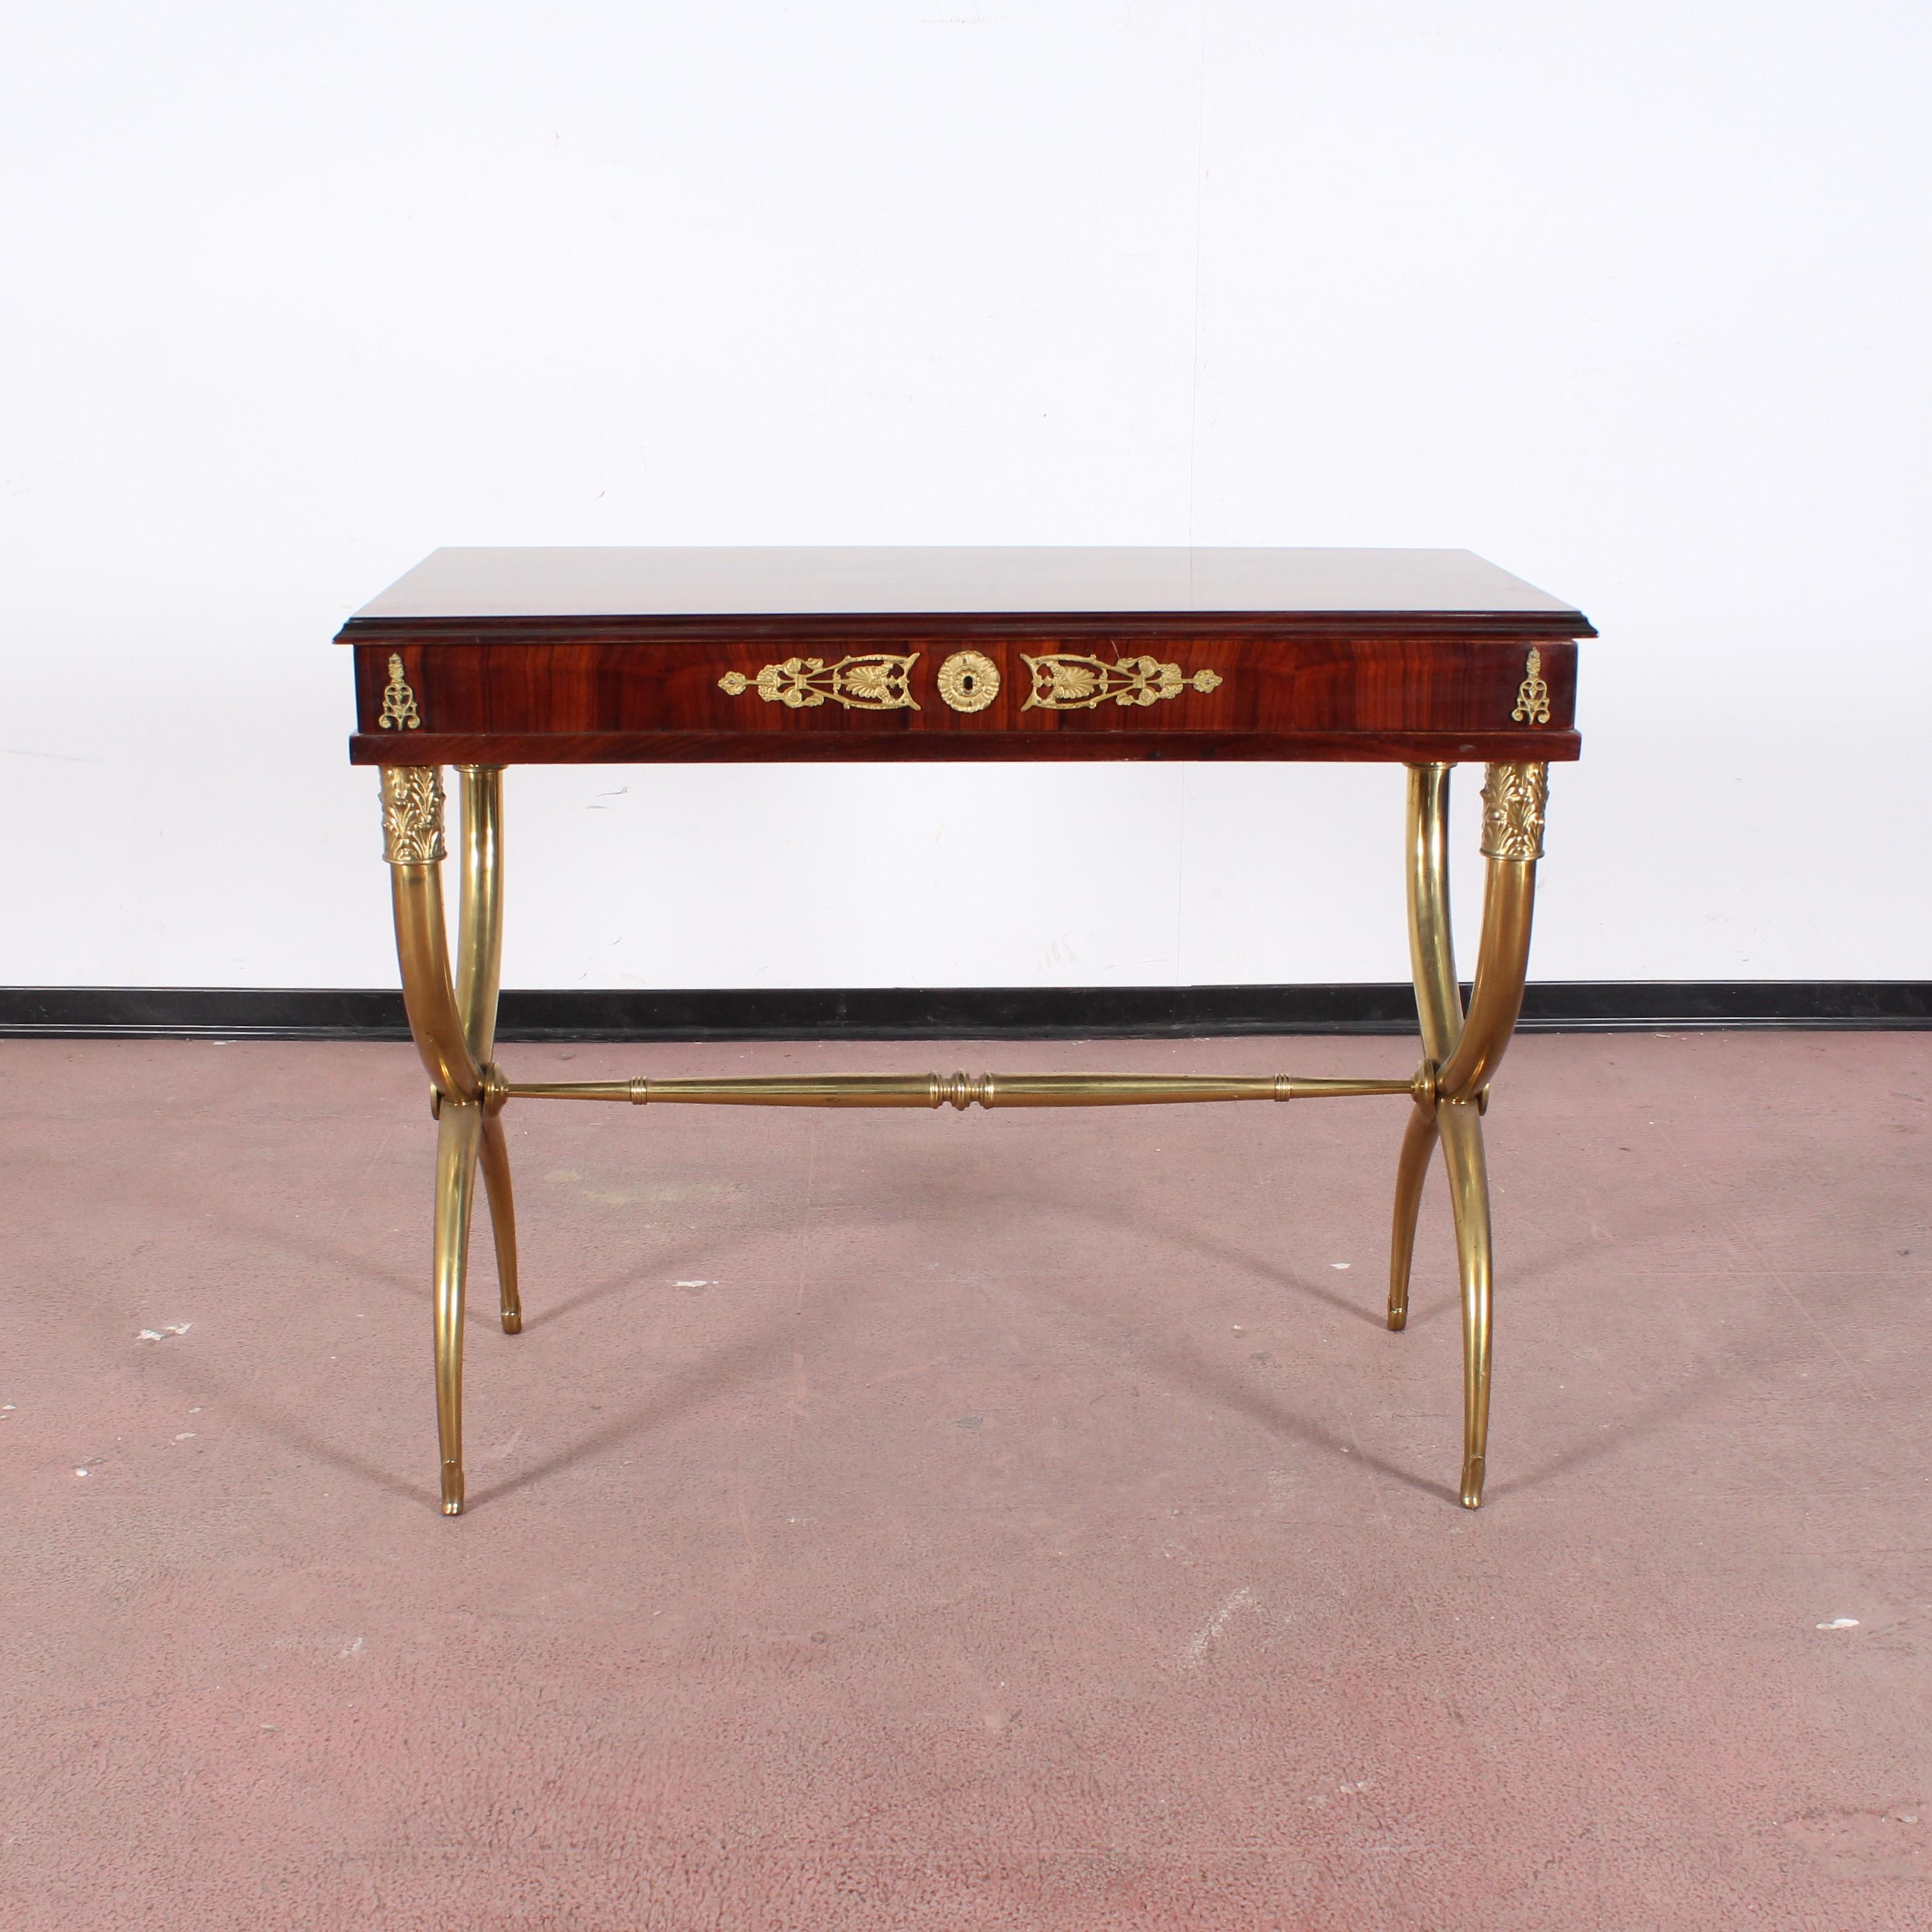 Mid-20th Century Midcentury Gio Ponti Wood and Brass Console Table with Top Container 1950s Italy